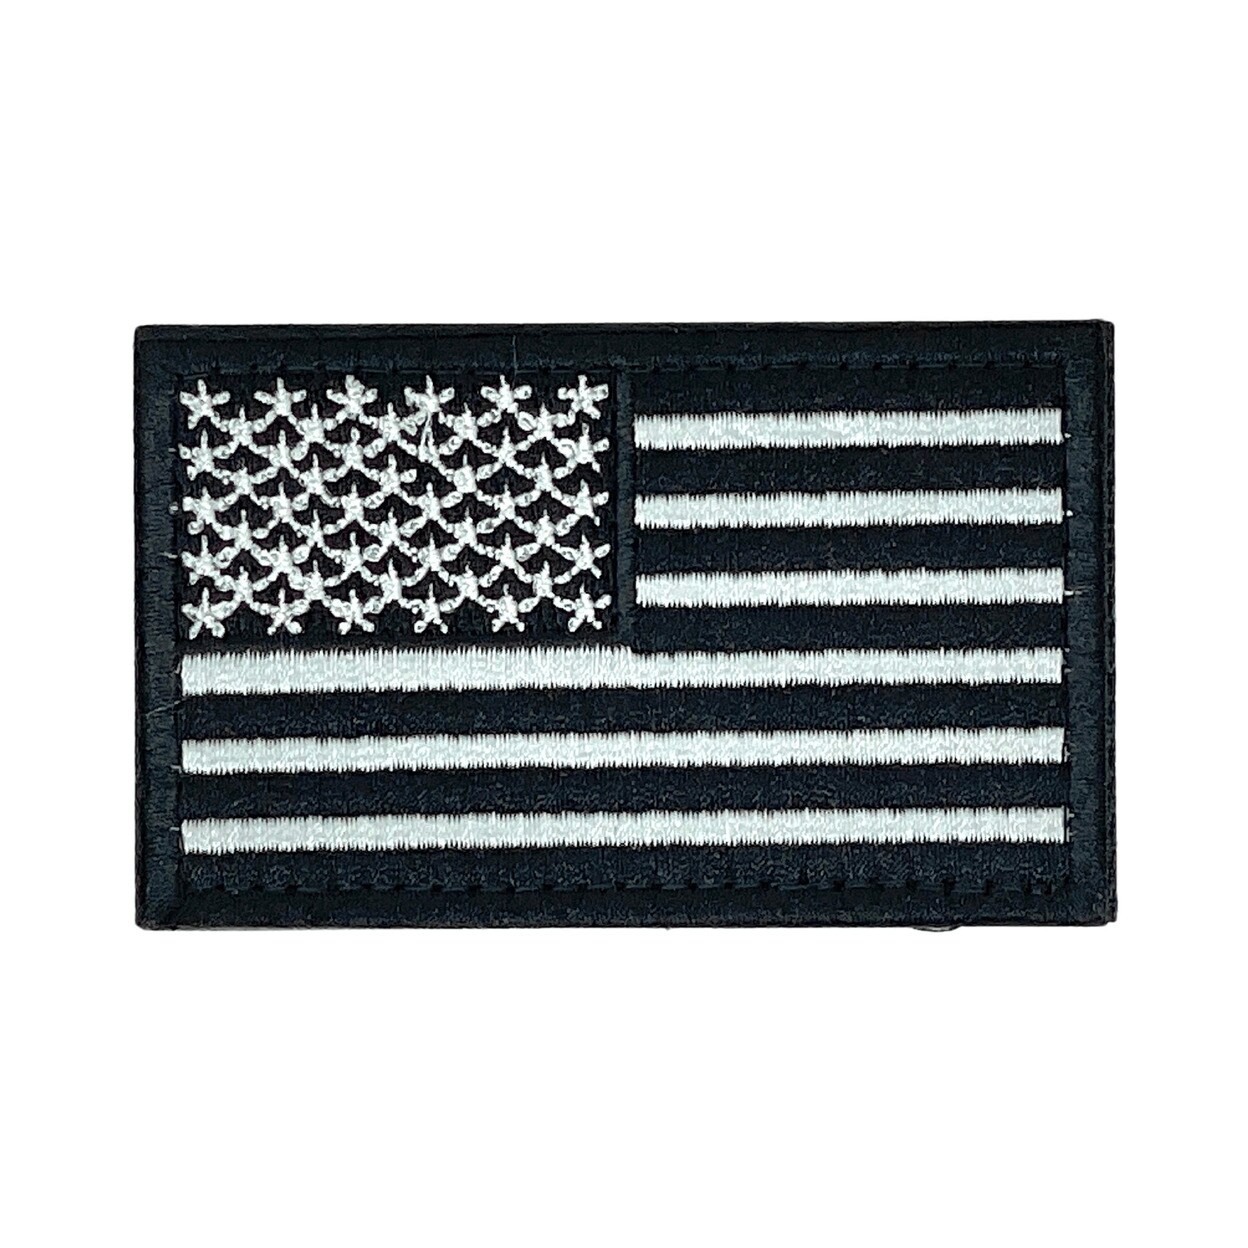 JupiterGear Tactical USA Flag Patch with Detachable Backing